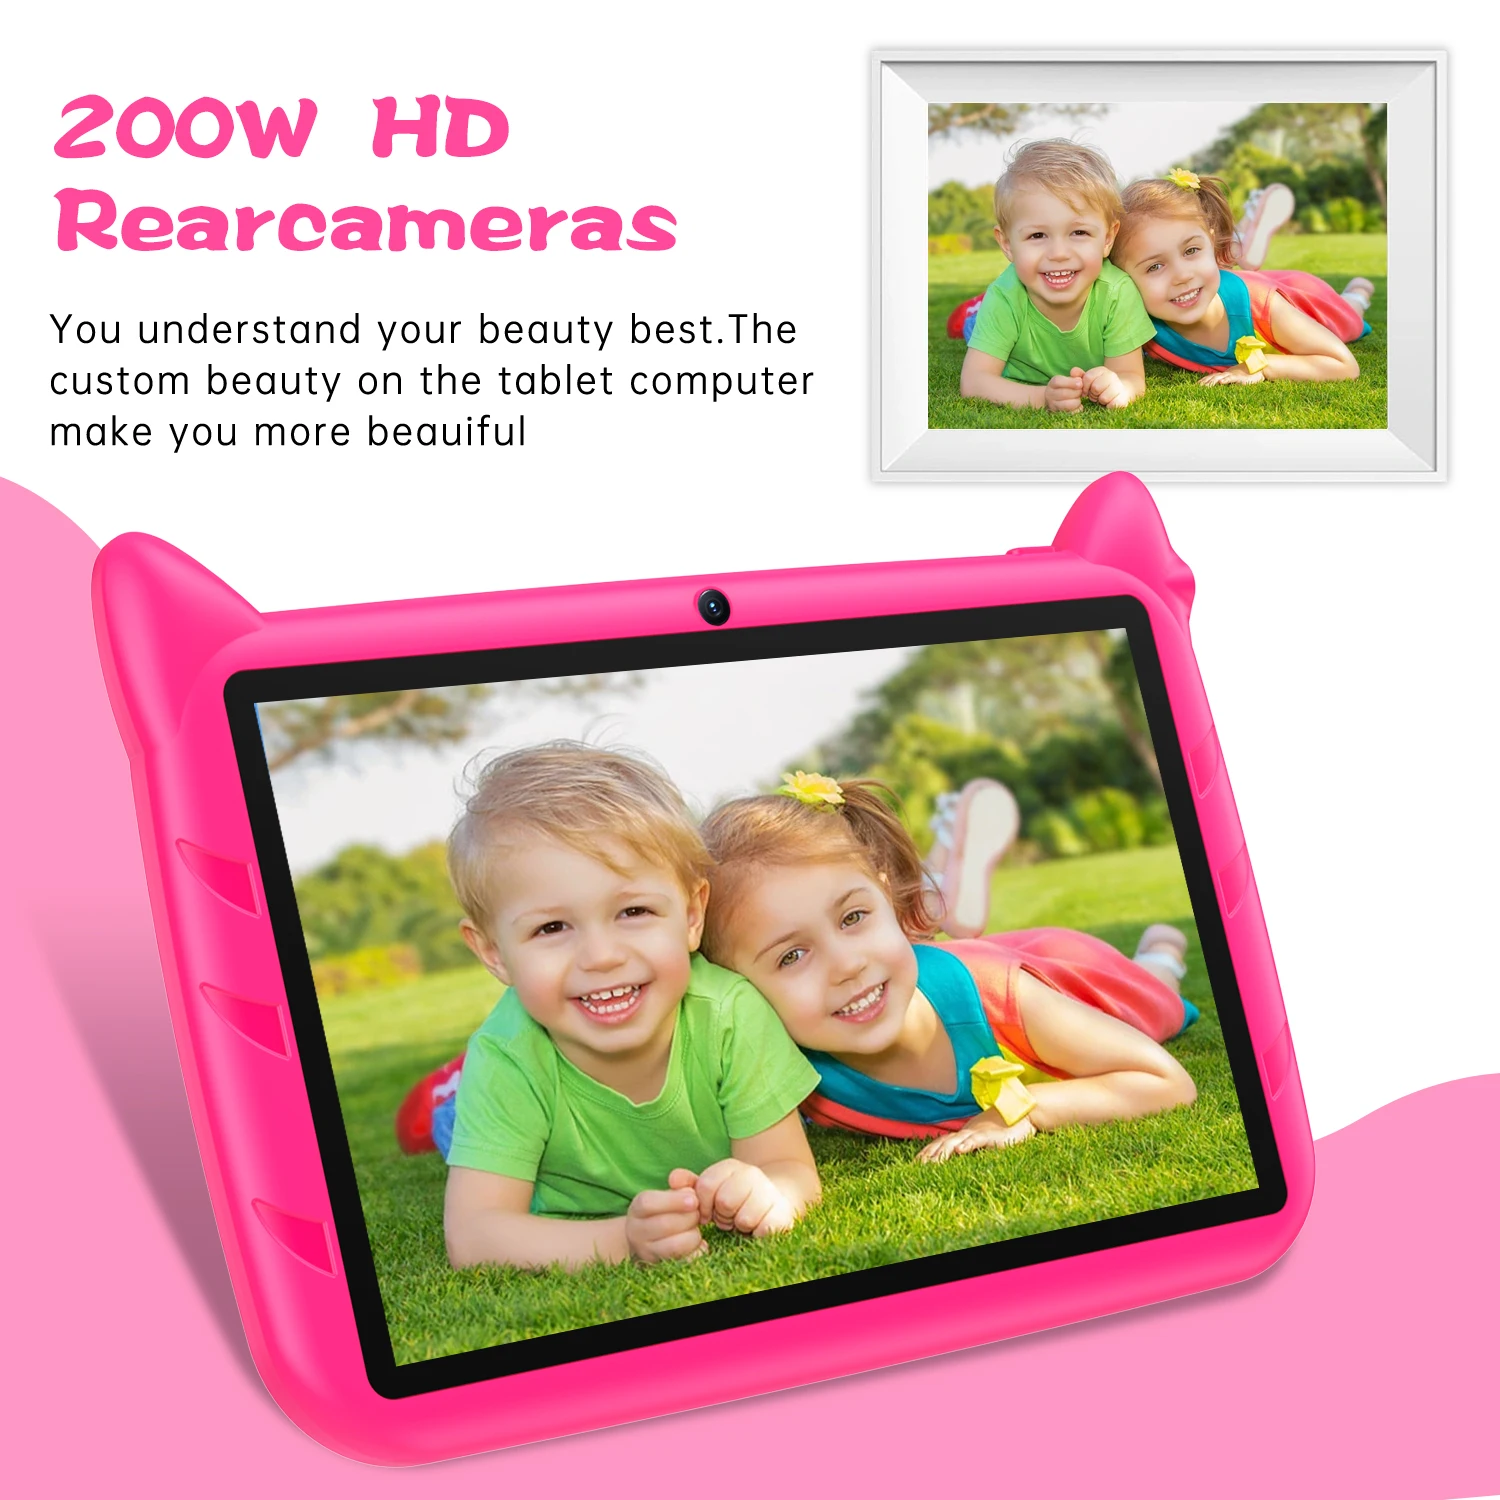 Q80 Sauenane 2GB/32GB cheap Kids Tablet 7 Inch  Cheap Quad Core Android 9.0  Children's Gift 5G WiFi Tablet Pc Tab 8 inch wifi tablet pc for kids children s best gift game apps kids android tablet quad core kids educational learning tablet